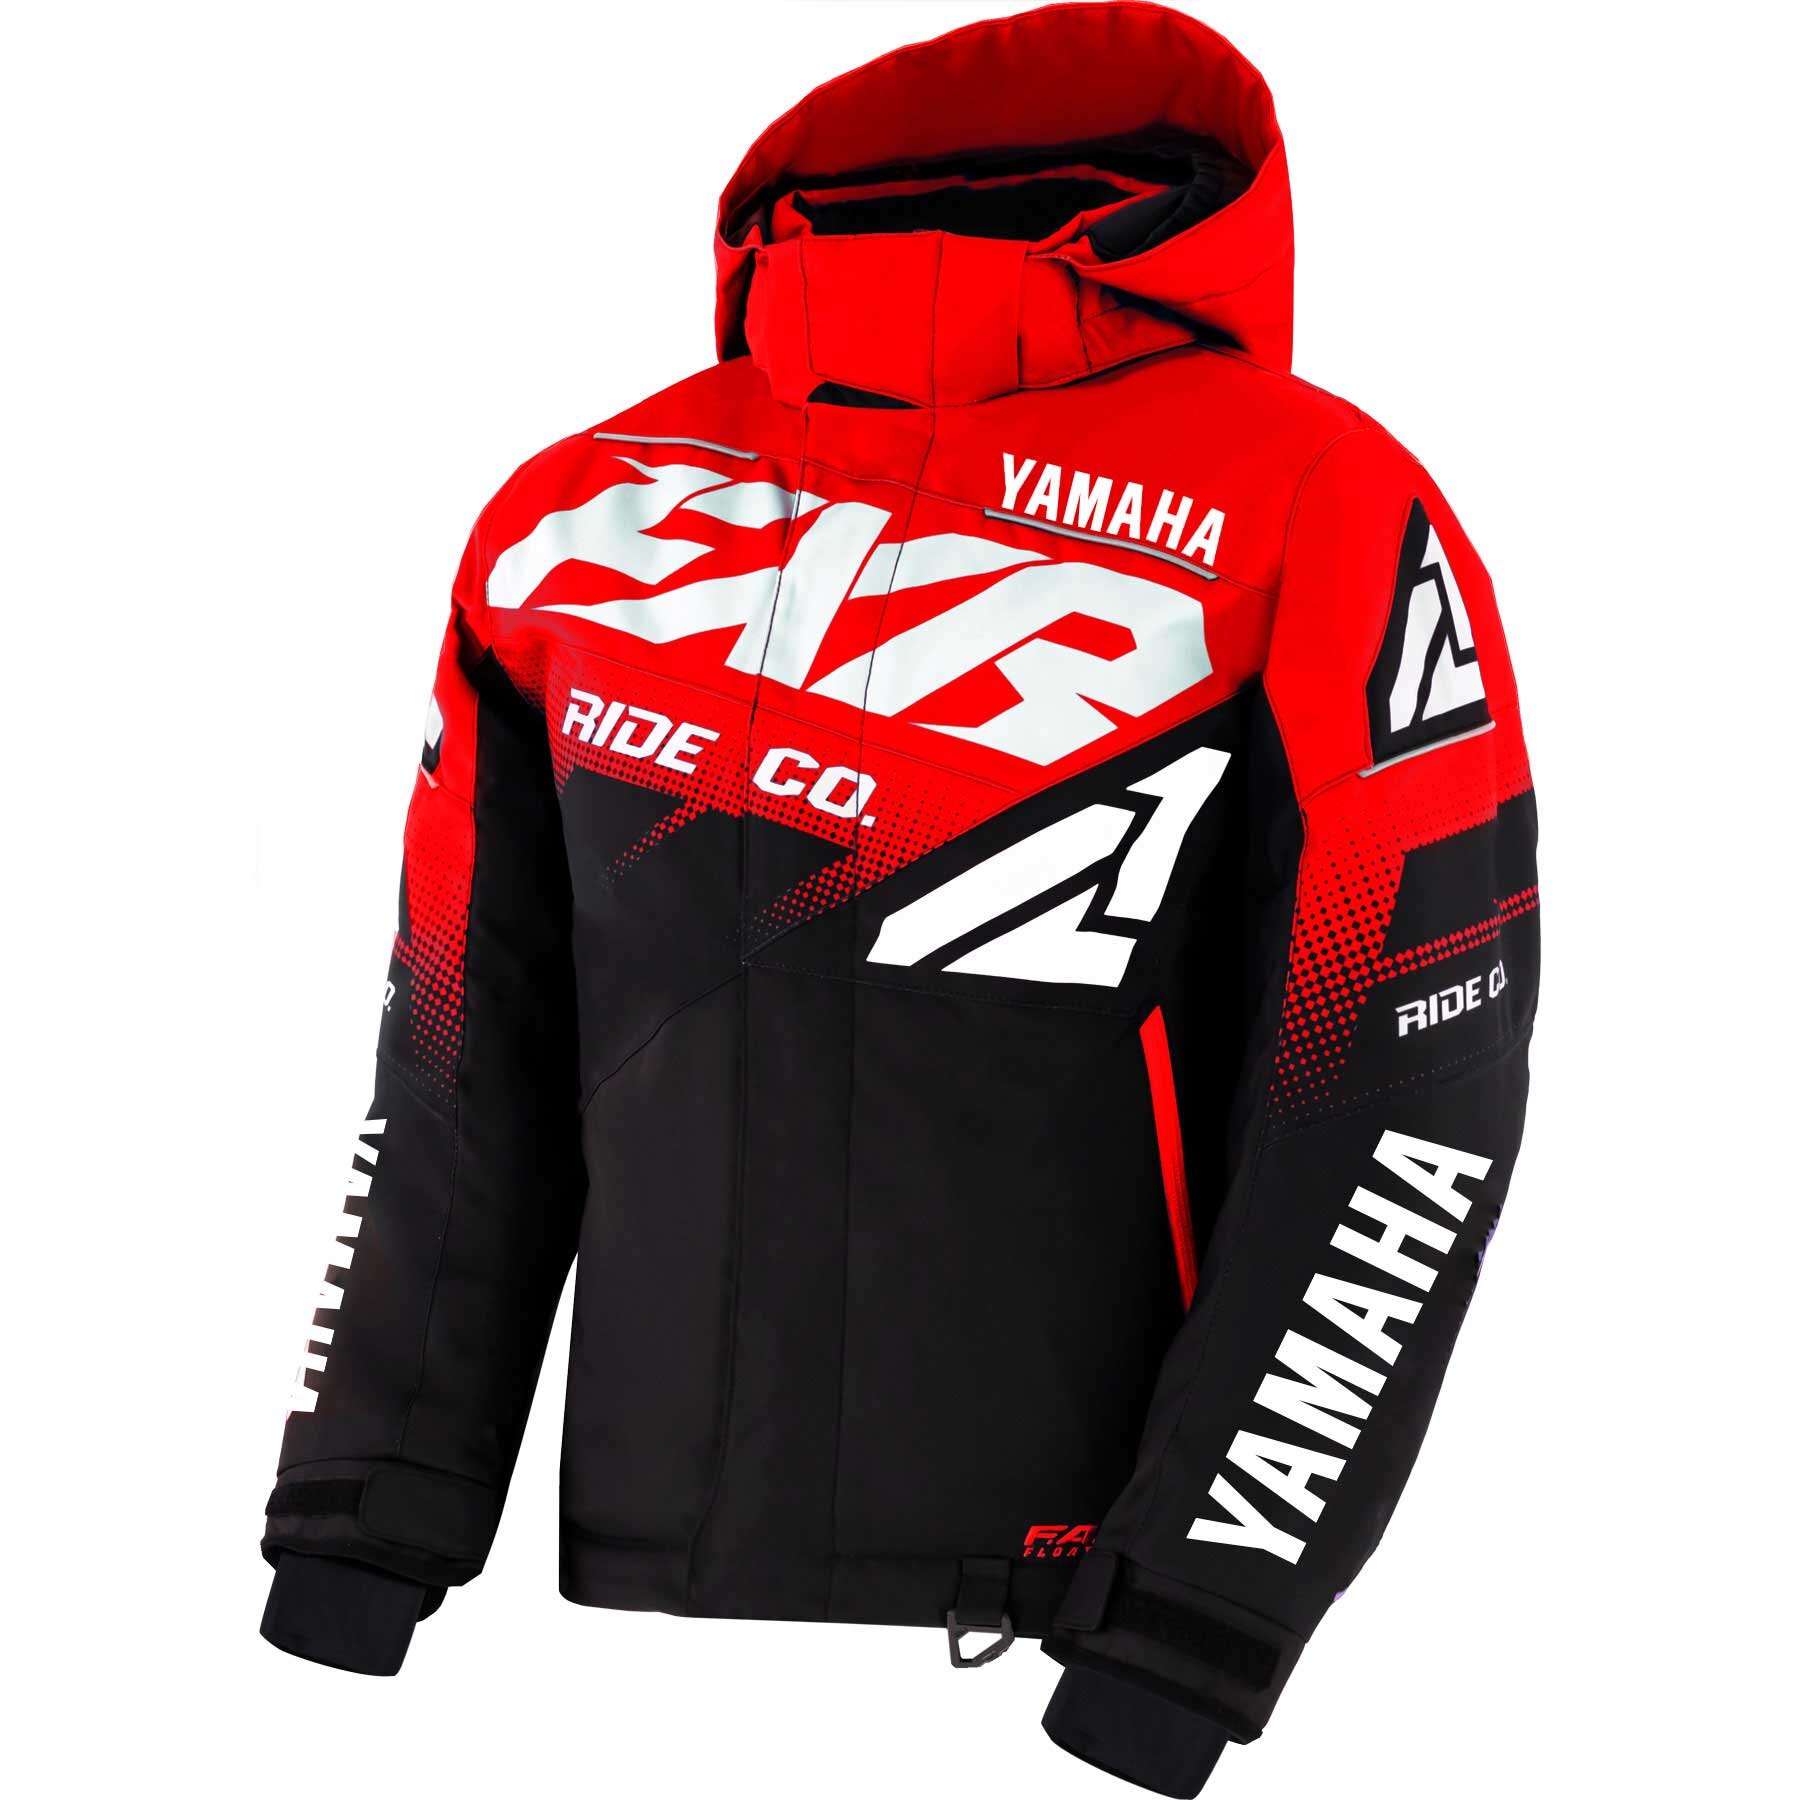 Youth Yamaha Boost Jacket by FXR® Size 10 red/black/white